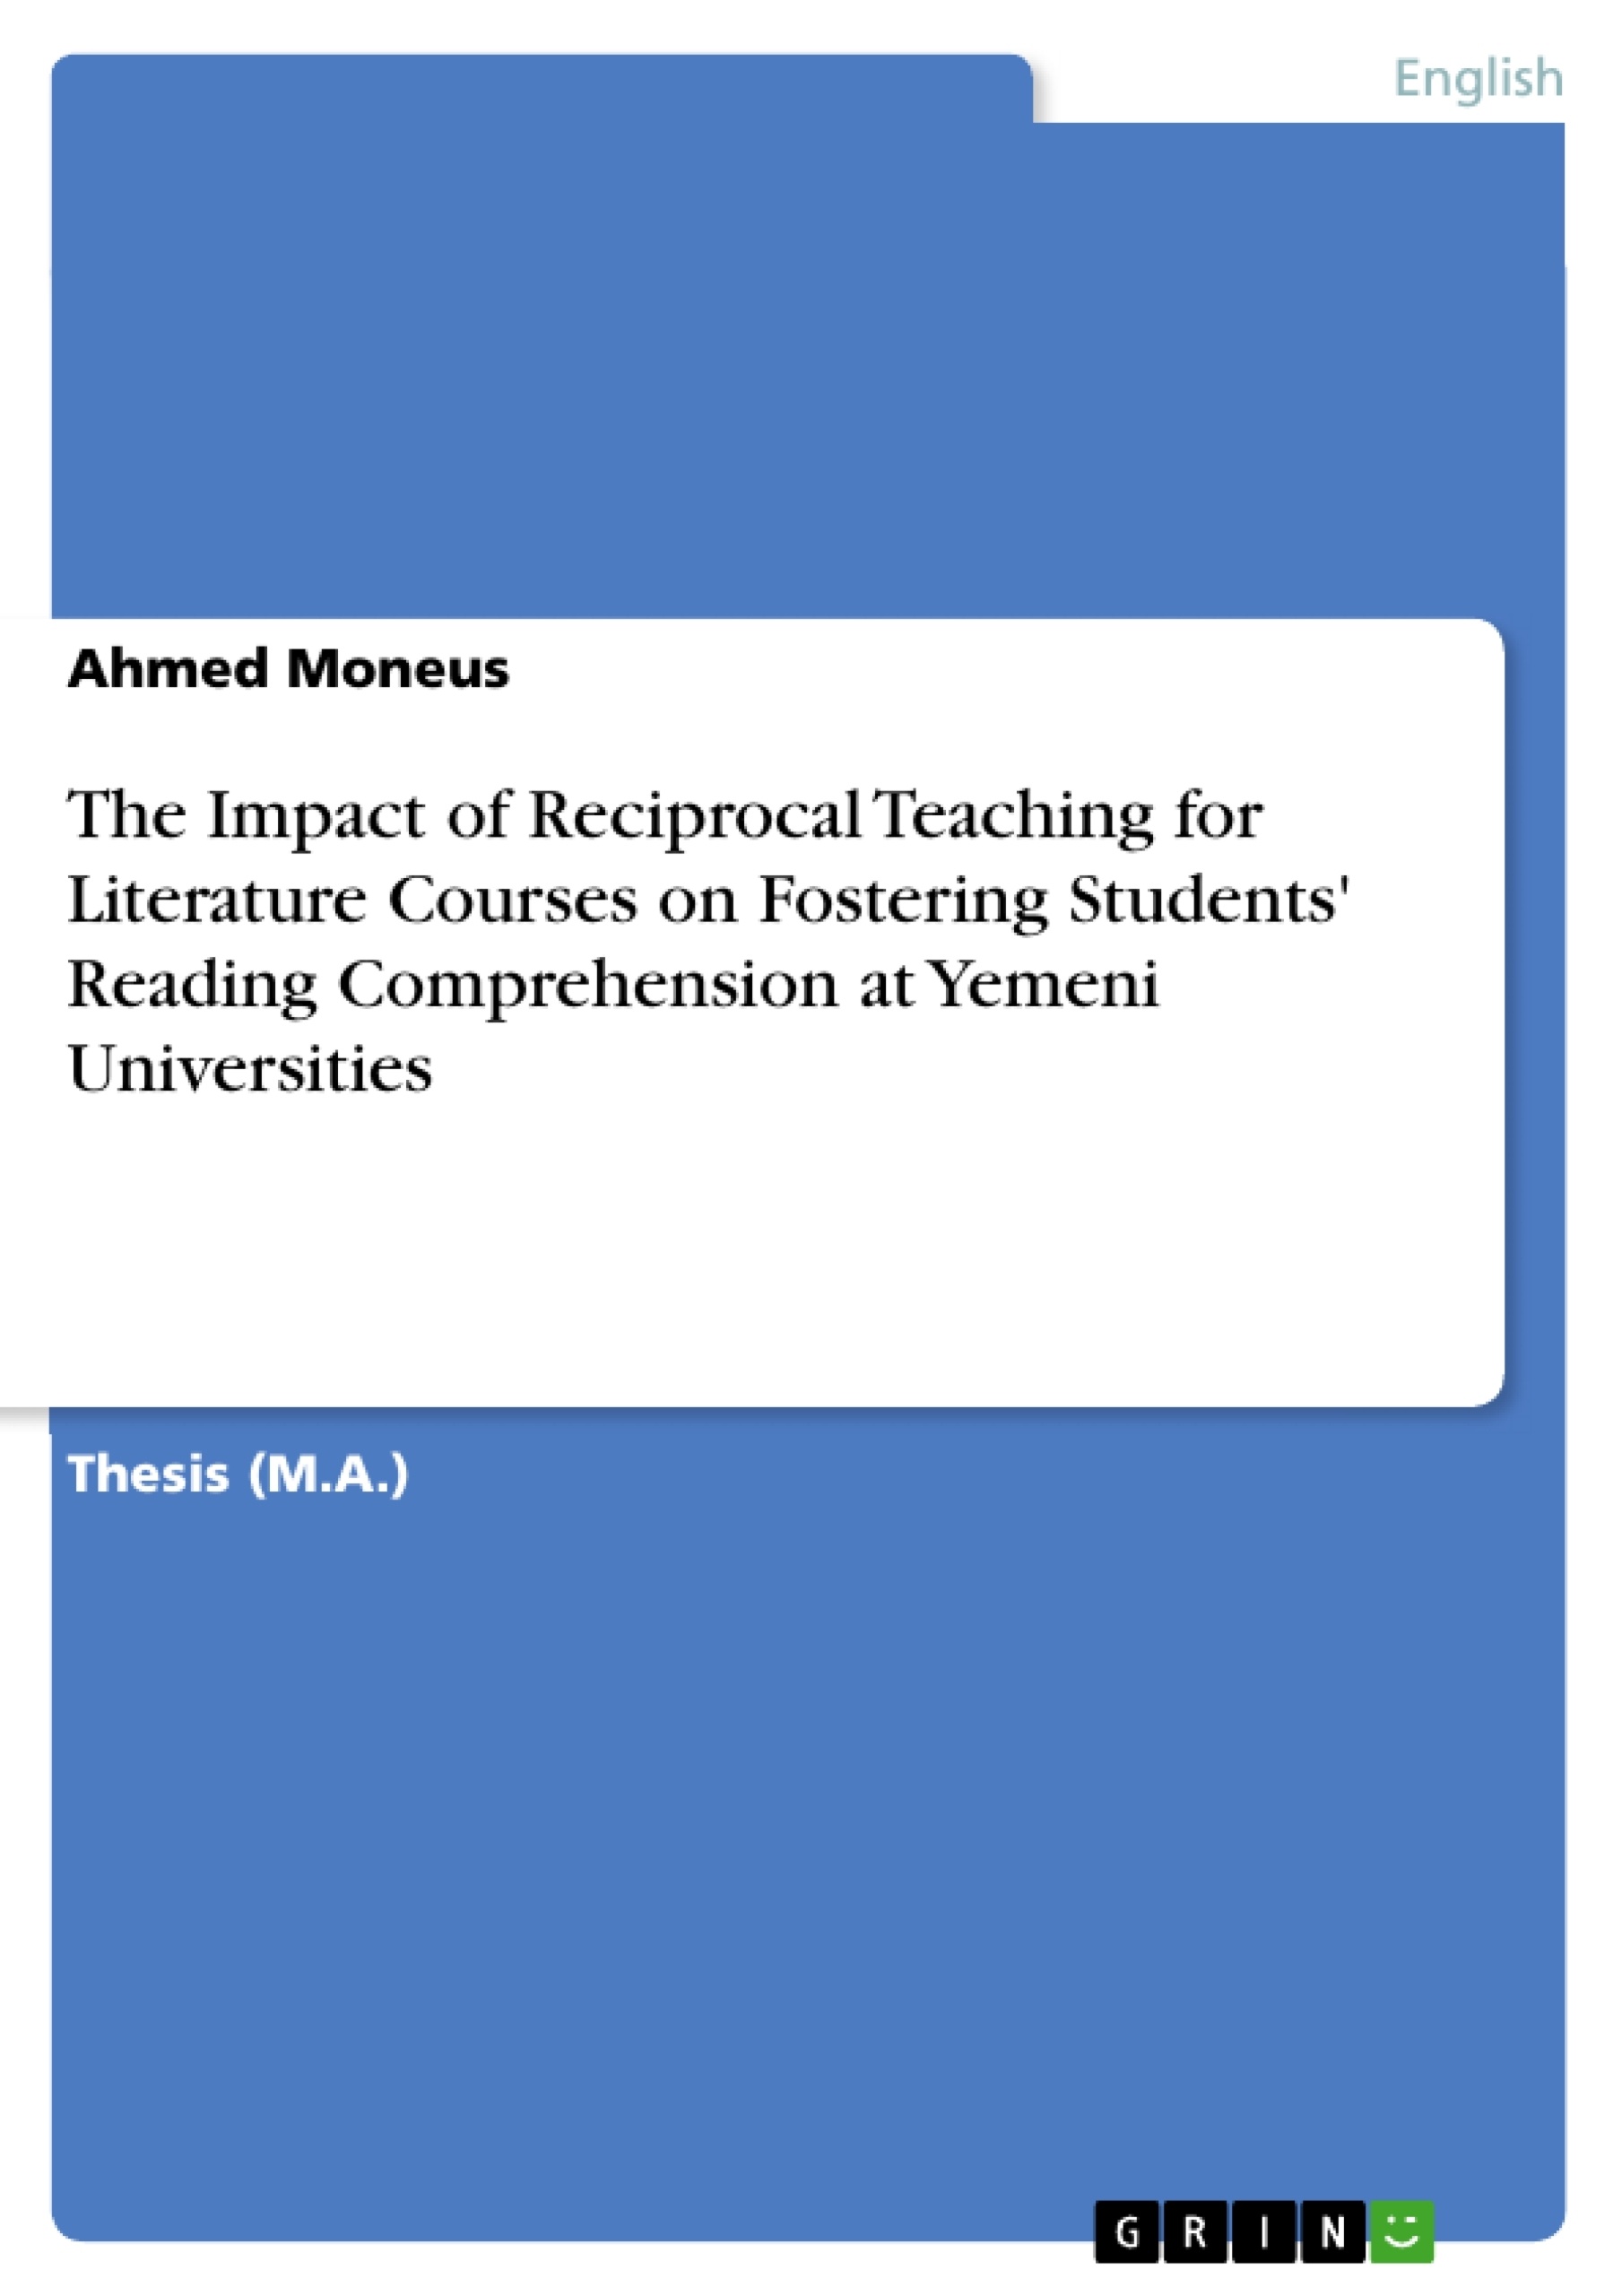 The　for　Literature　on　Courses　Universities　Fostering　Students'　Impact　Comprehension　at　Yemeni　of　Teaching　Reciprocal　Reading